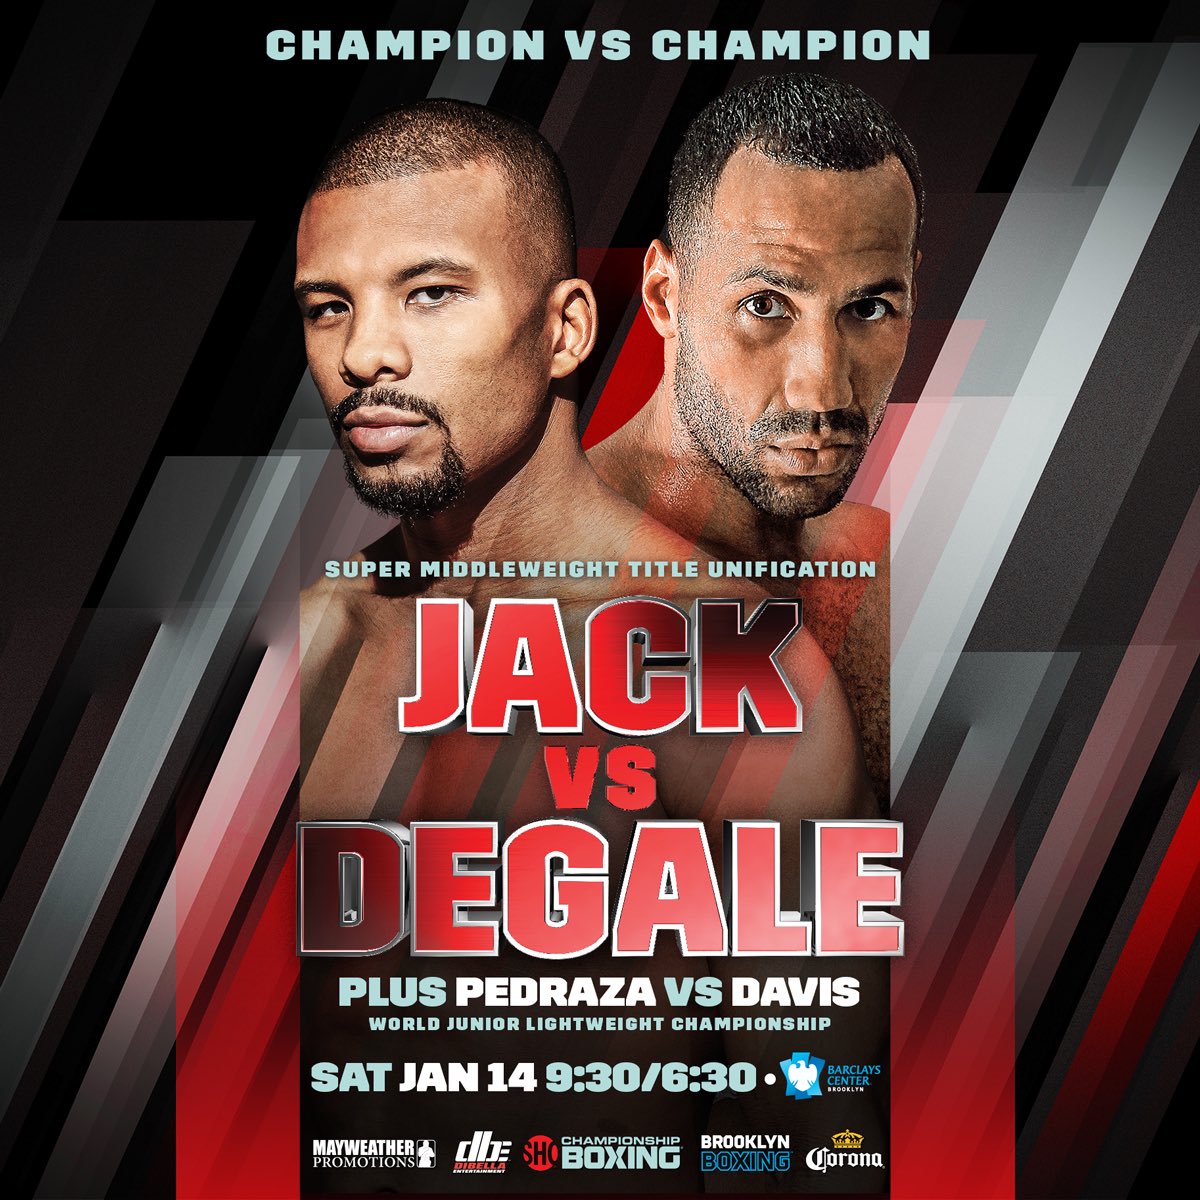 Tune-in to SHOWTIME now! #JackDeGale #PedrazaDavis https://t.co/q1zvPq5rg6